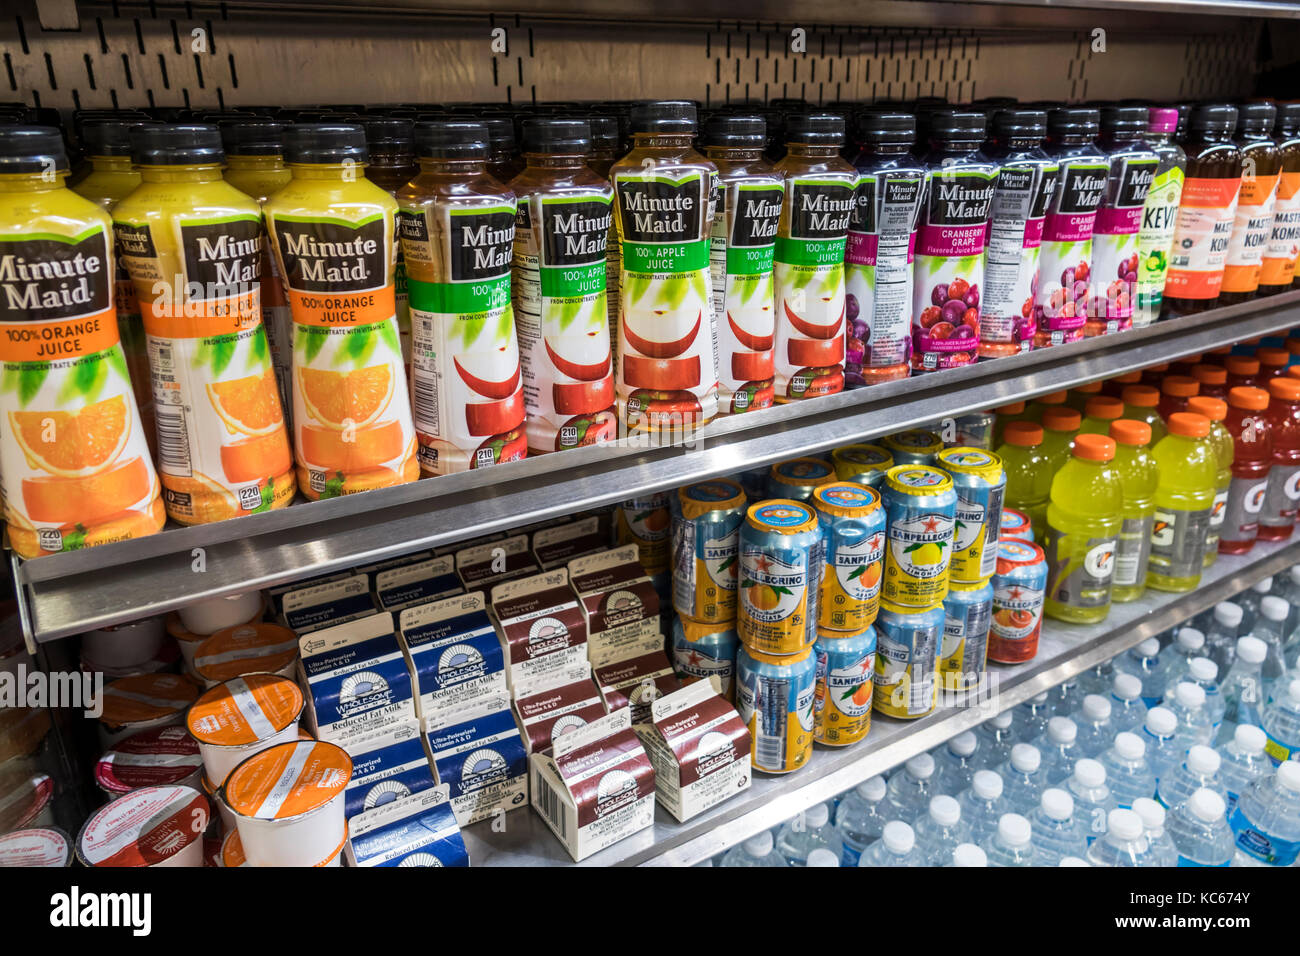 Washington DC,National Gallery of Art,museum,Cascade Cafe,refrigerated shelves,cold drink drinks,fruit juice,soda,milk,Minute Maid,display sale DC1705 Stock Photo